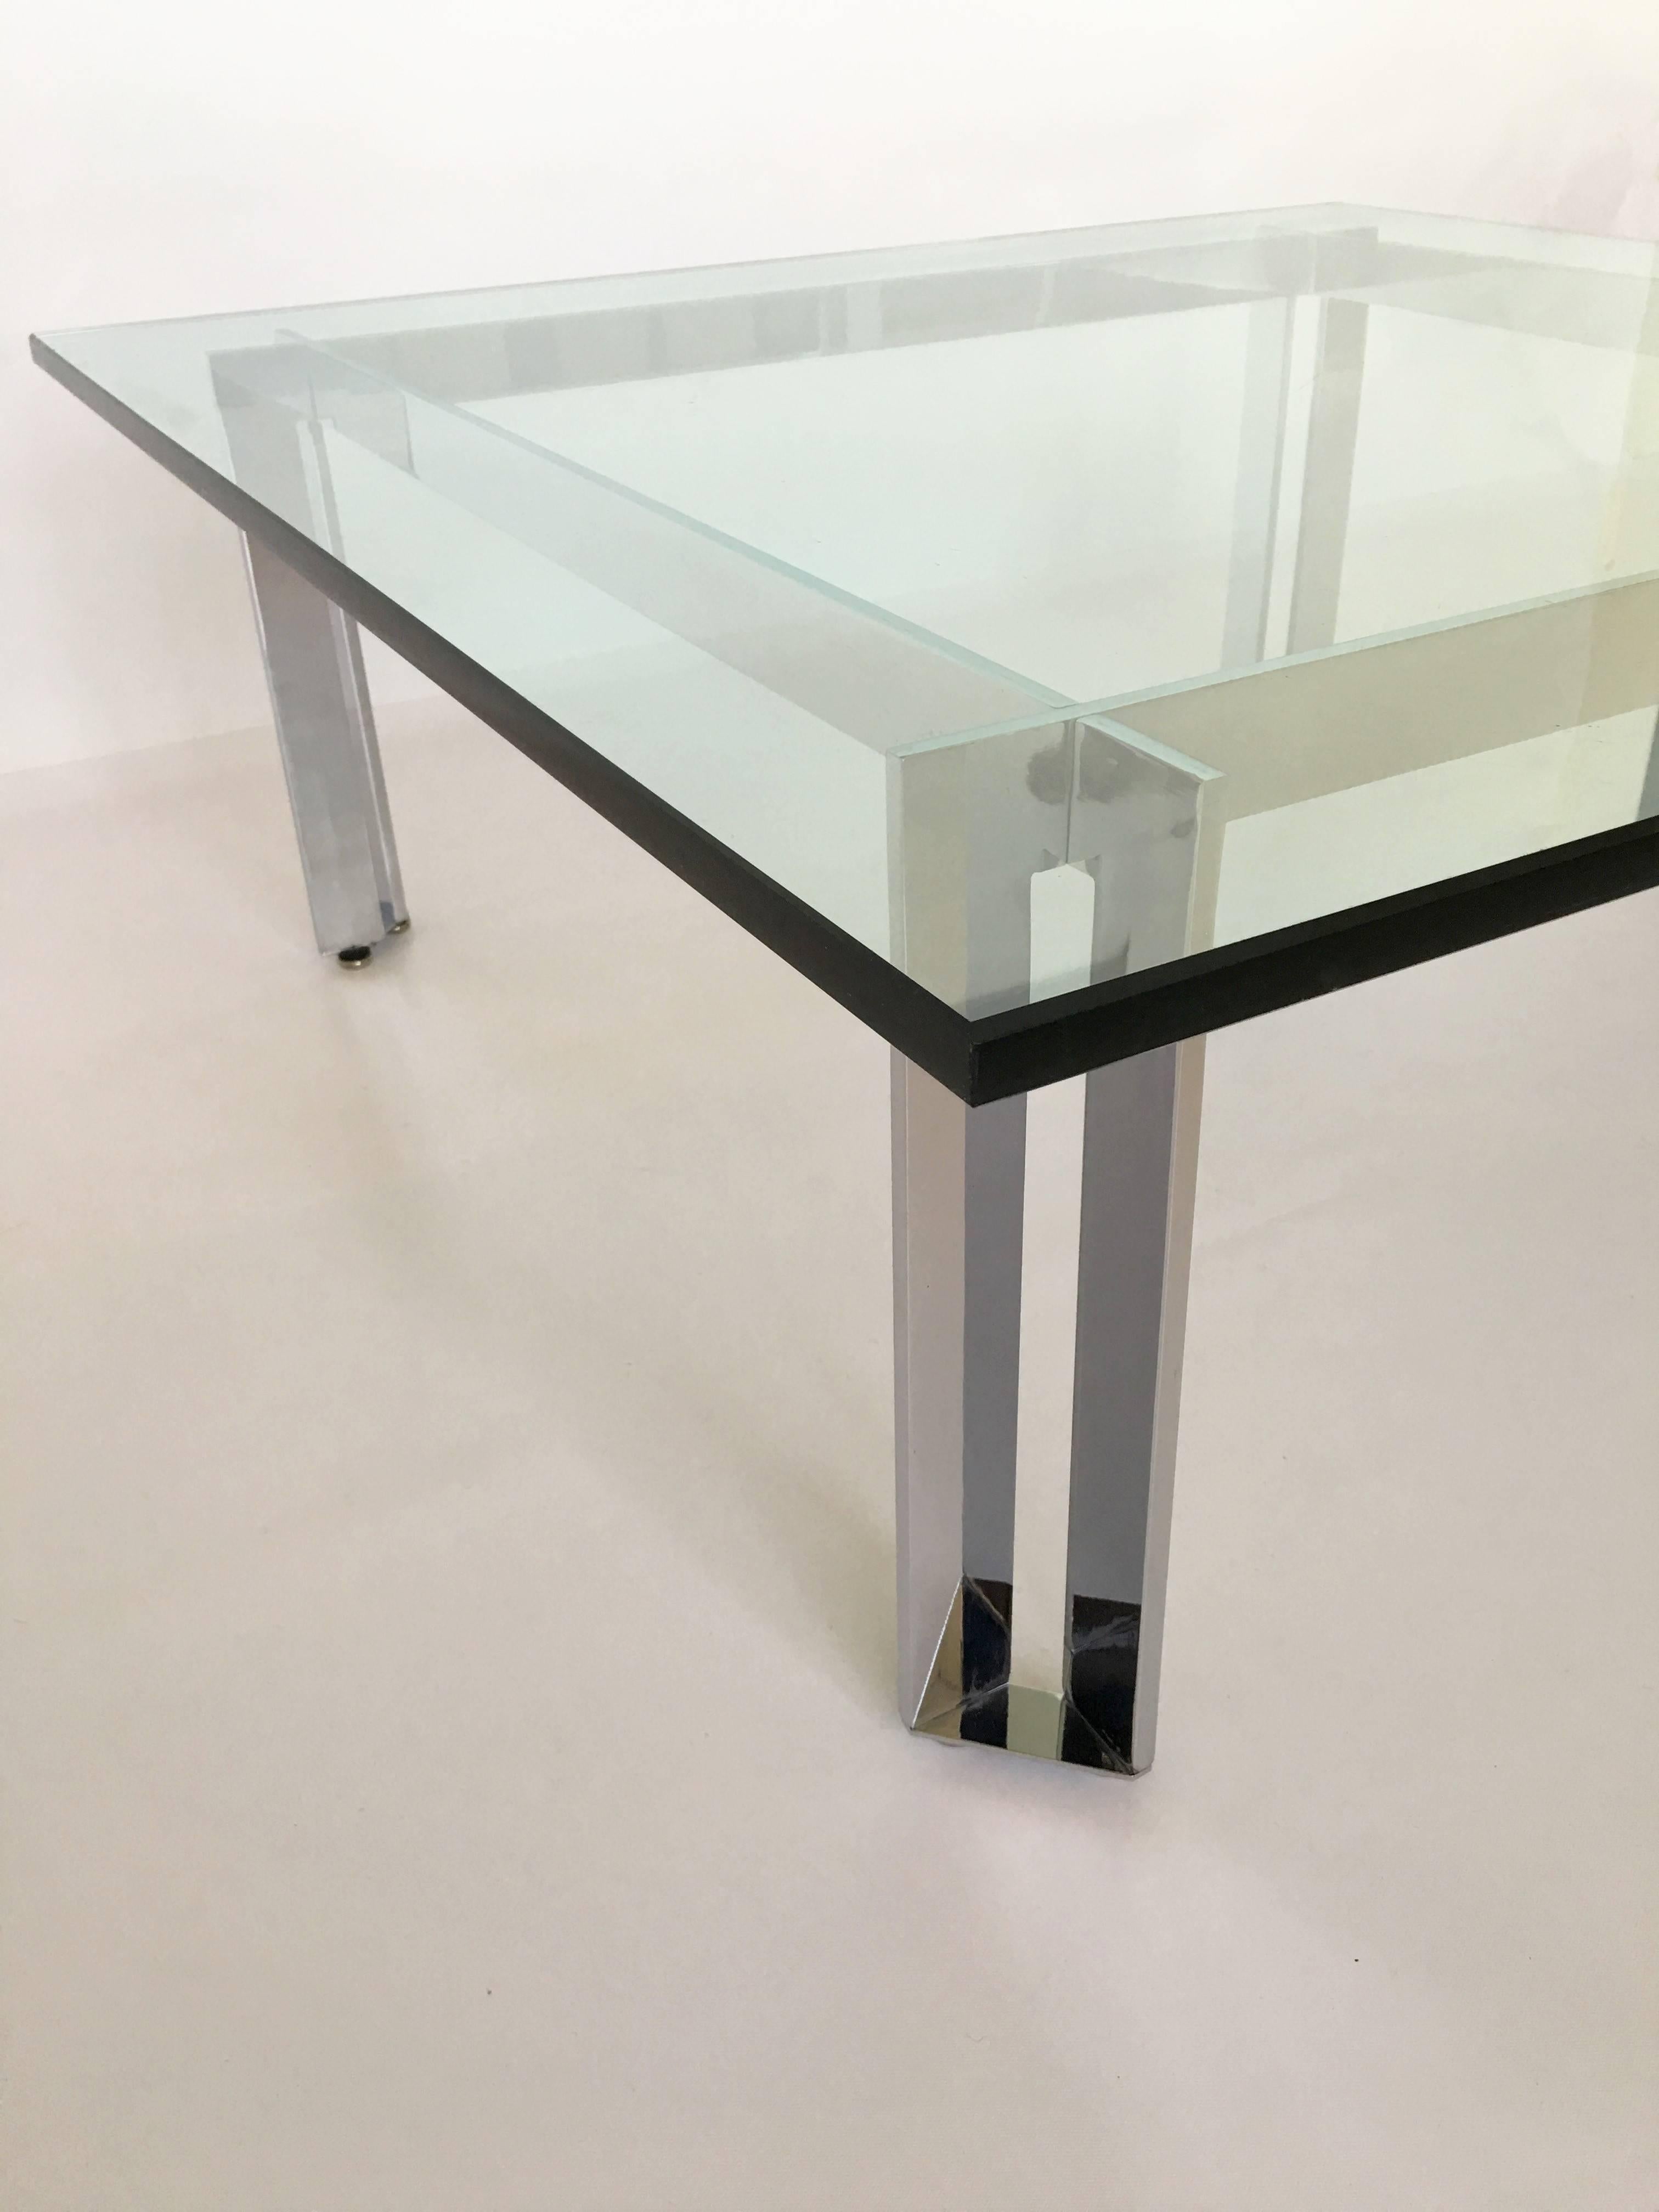 Mid-20th Century Modernist Square Chrome and Glass Coffee Table For Sale